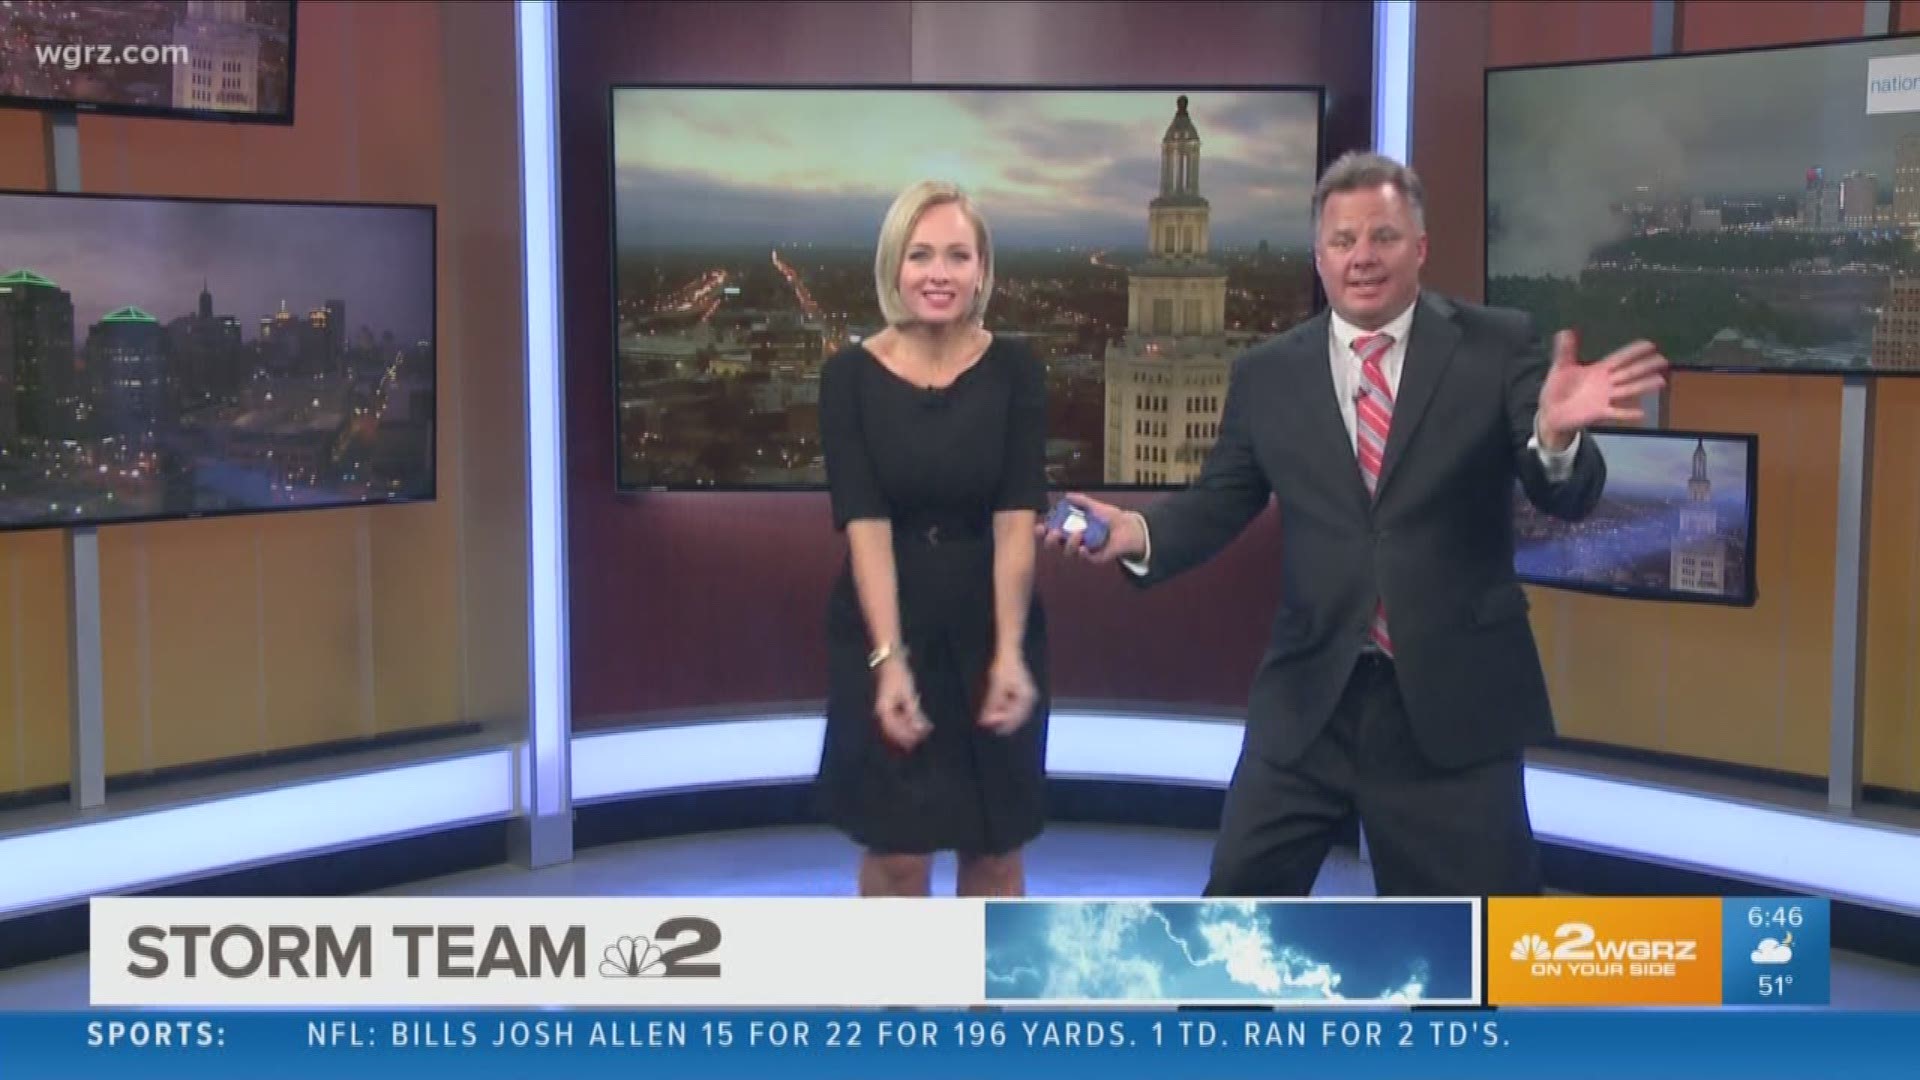 It's National Weatherperson's Day and we love our great Daybreak meteorologist, Patrick!